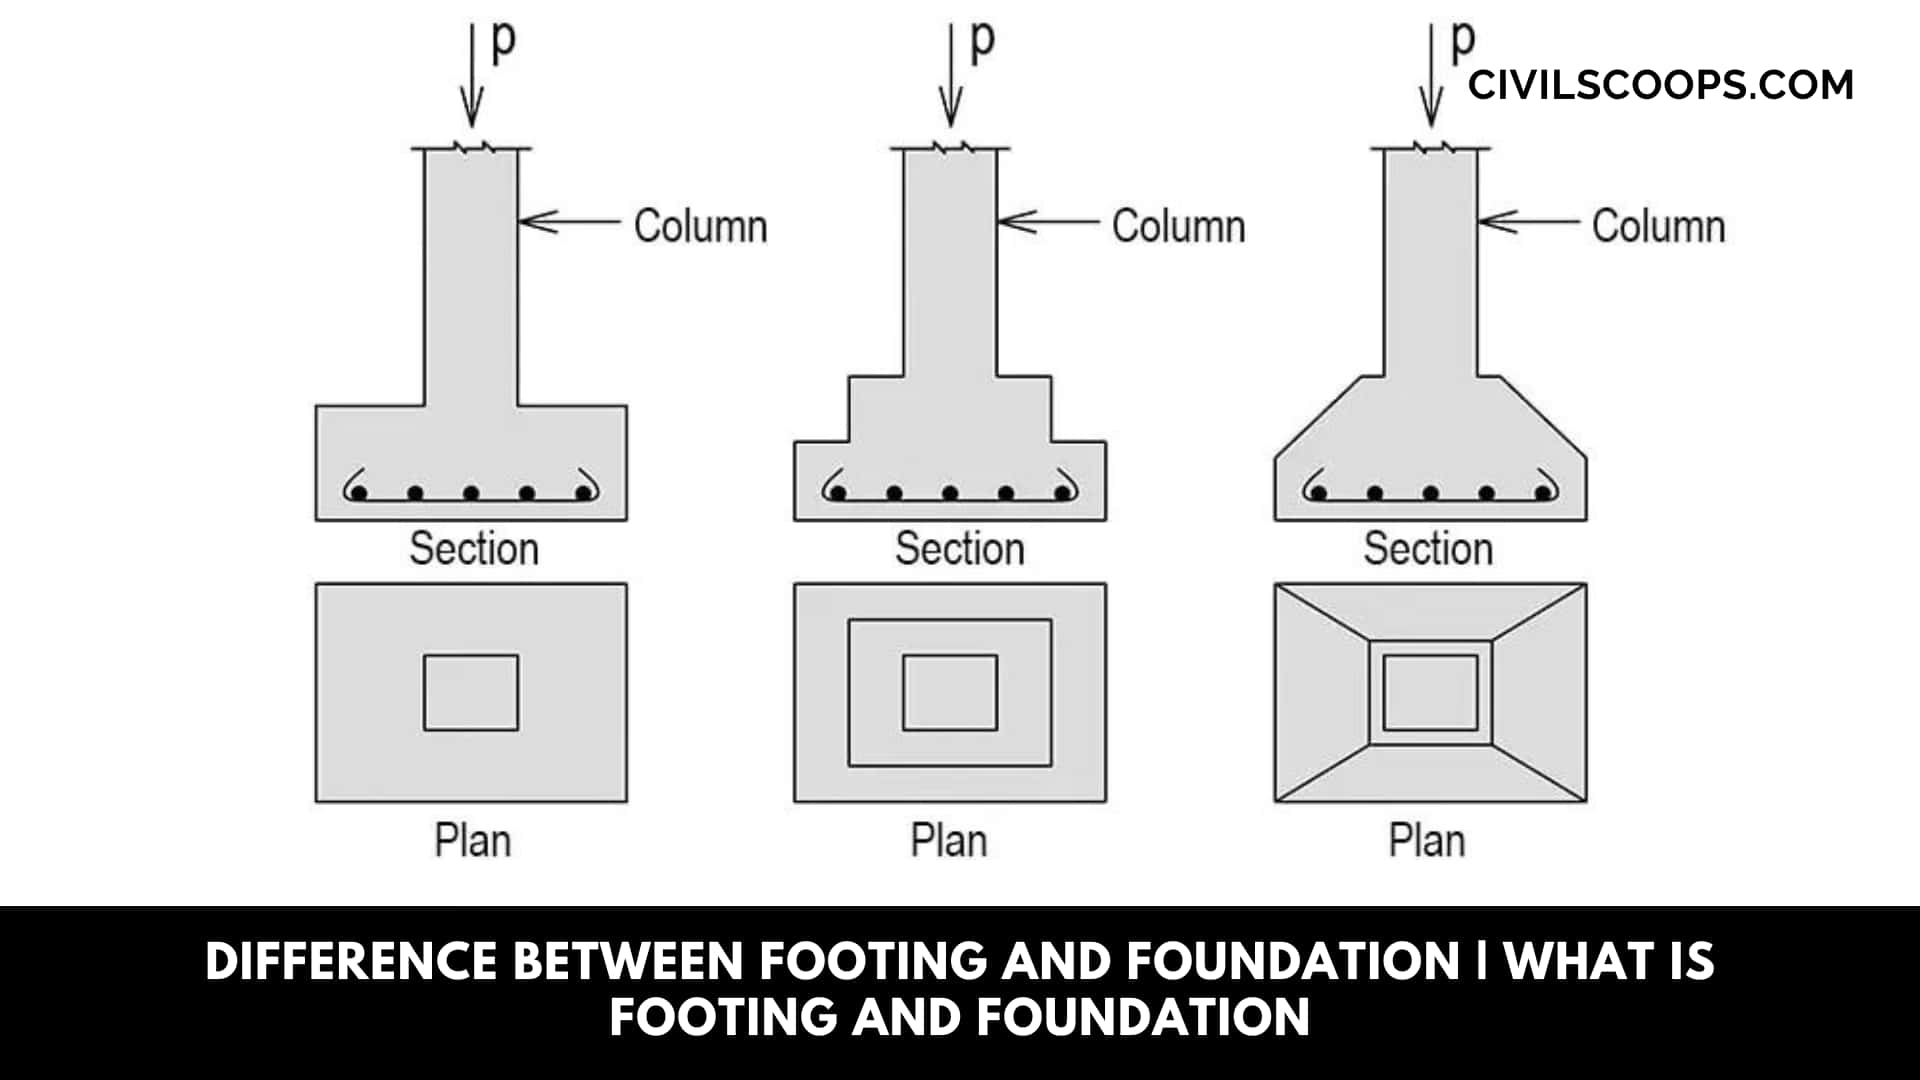 Difference Between Footing and Foundation | What is Footing and Foundation 